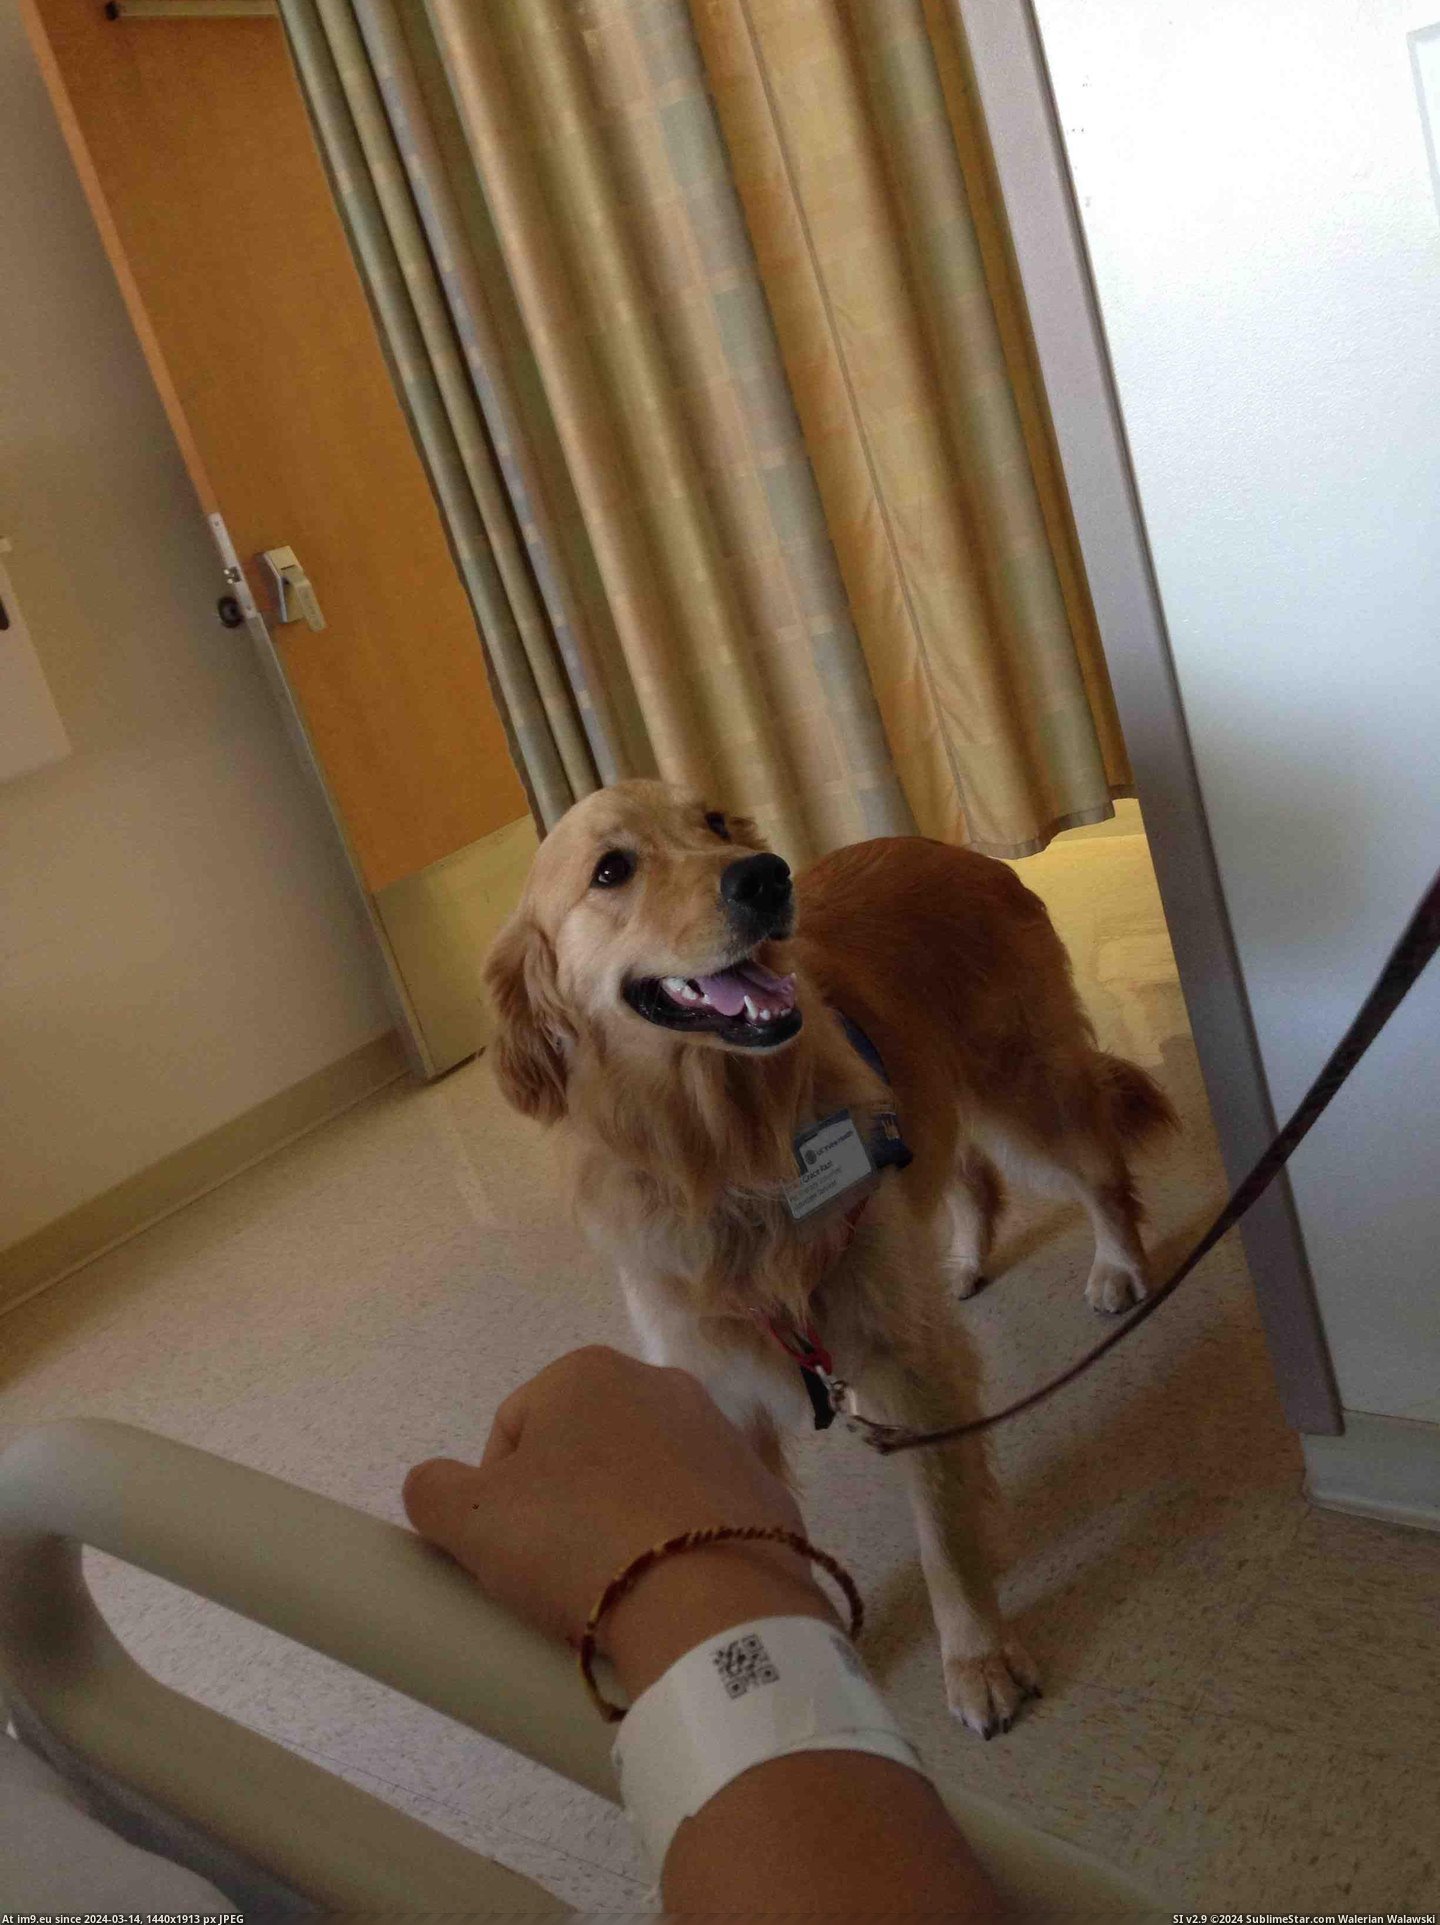 #Day #Bed #Dog #Molly #Therapy #Stay #Rest #Hospital [Aww] going on day four of bed rest in a hospital. Molly the therapy dog made my stay so much better! Pic. (Изображение из альбом My r/AWW favs))